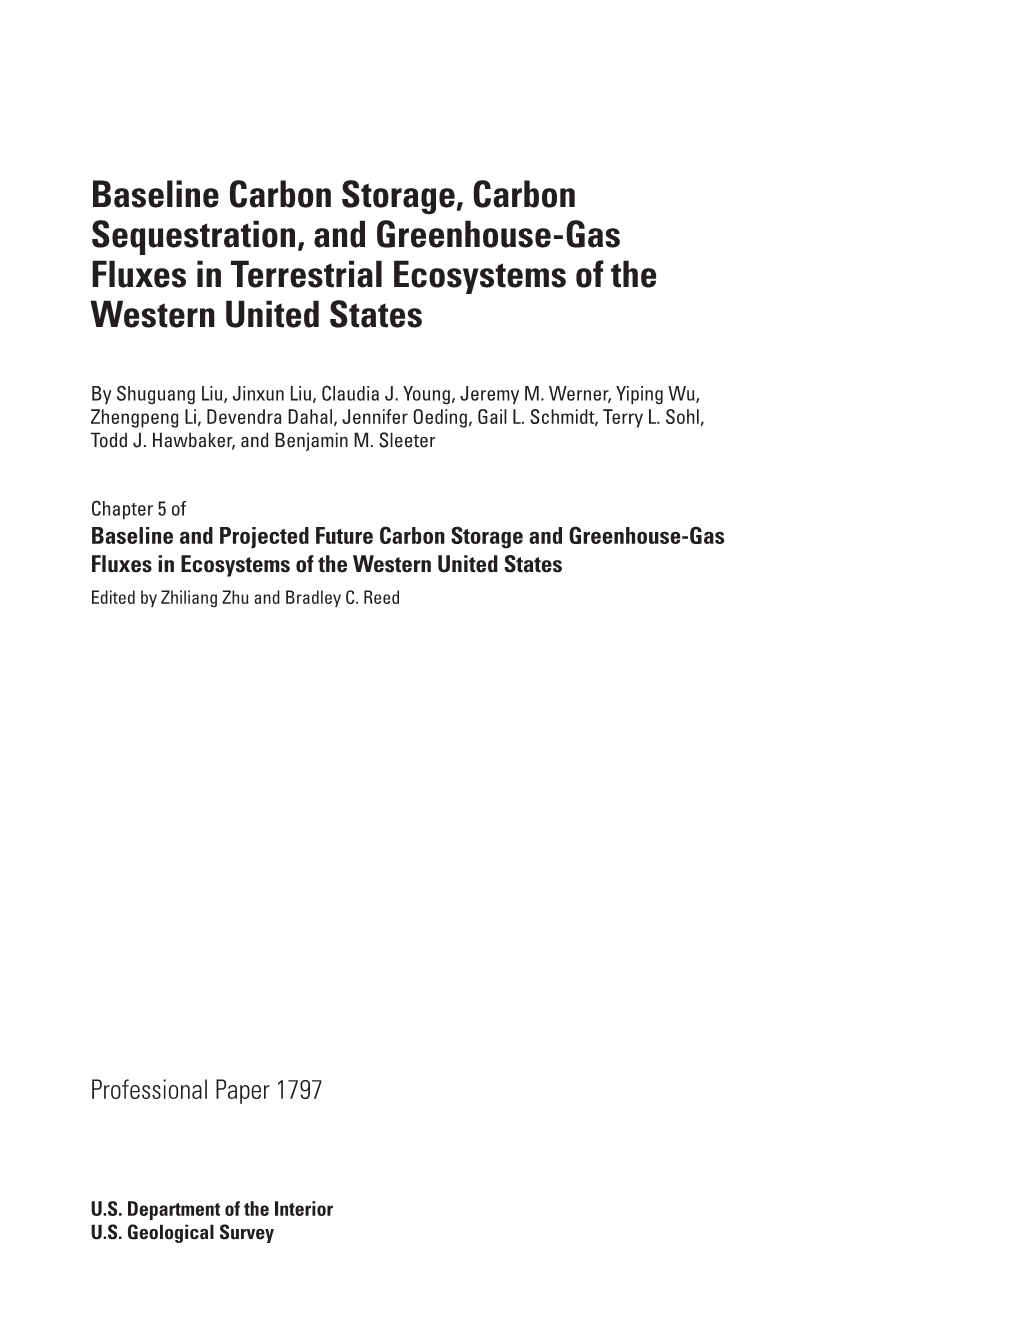 Chapter 5. Baseline Carbon Storage, Carbon Sequestration, and Greenhouse-Gas Fluxes in Terrestrial Ecosystems of the Western United States